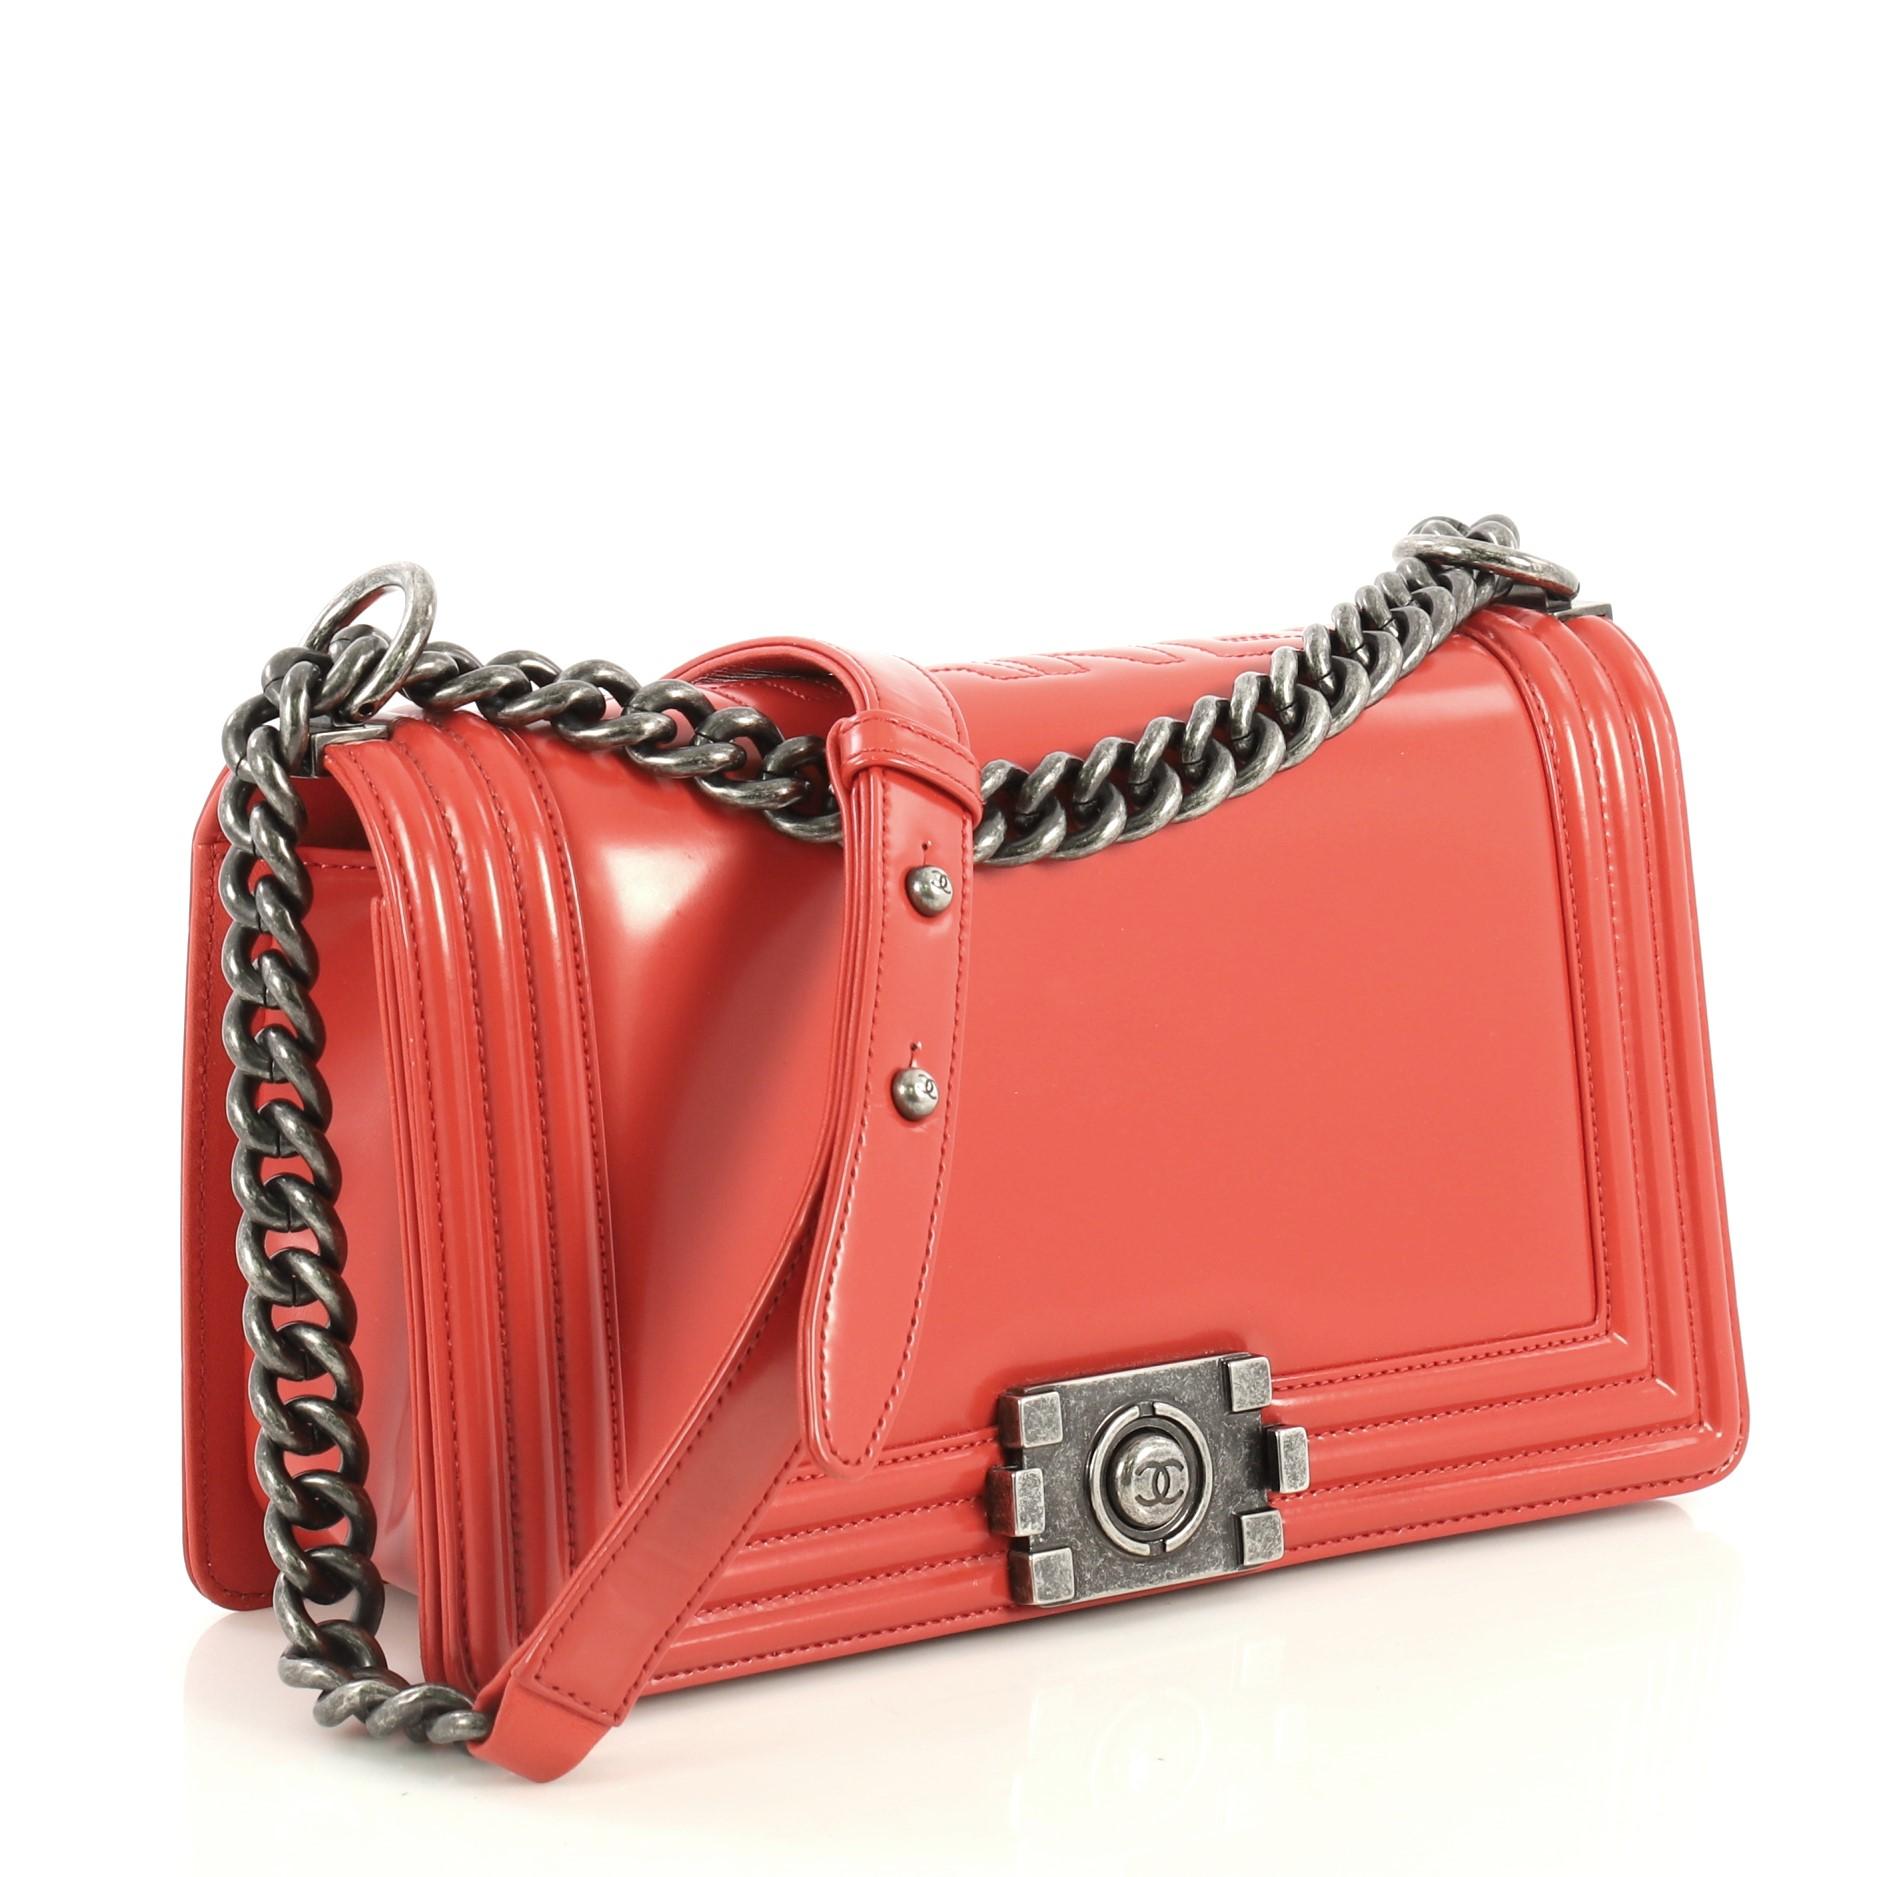 This Chanel Reverso Boy Flap Bag Glazed Calfskin Old Medium, crafted in red glazed calfskin leather, features chain link strap with leather pad and aged silver-tone hardware. Its CC boy push-lock closure opens to a red fabric interior with slip